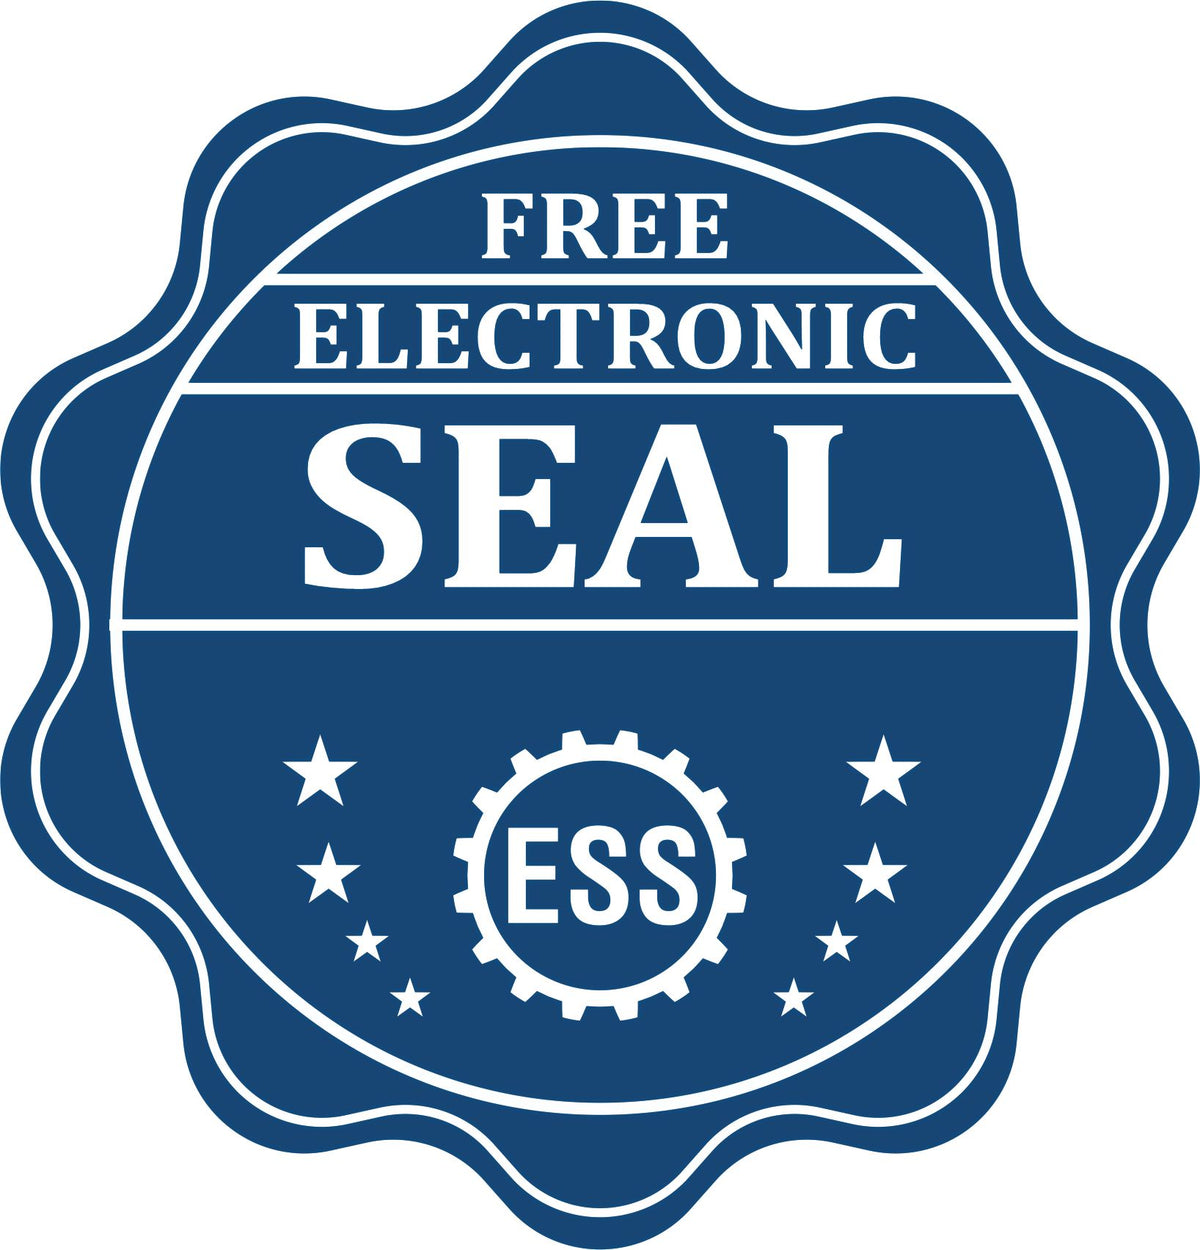 A badge showing a free electronic seal for the Extended Long Reach Louisiana Architect Seal Embosser with stars and the ESS gear on the emblem.